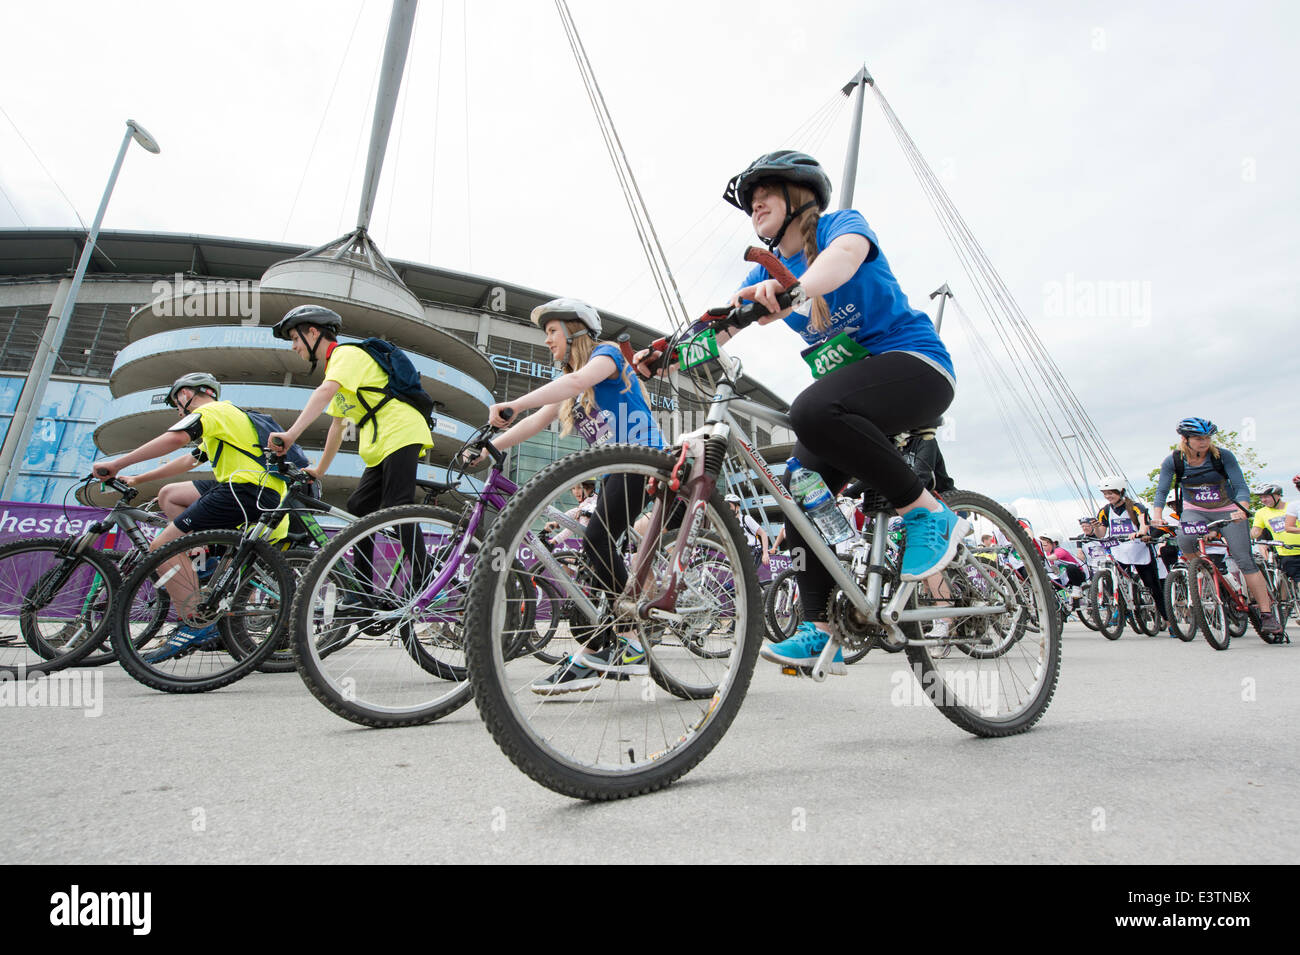 Manchester, UK. 29th June 2014. Thousands of participants take part in the Great Manchester Cycle mass participation cycling event, which takes place each year in the city. The cyclist start at the Etihad City of Manchester Stadium, home of Manchester City Football Club Credit:  Russell Hart/Alamy Live News. Stock Photo